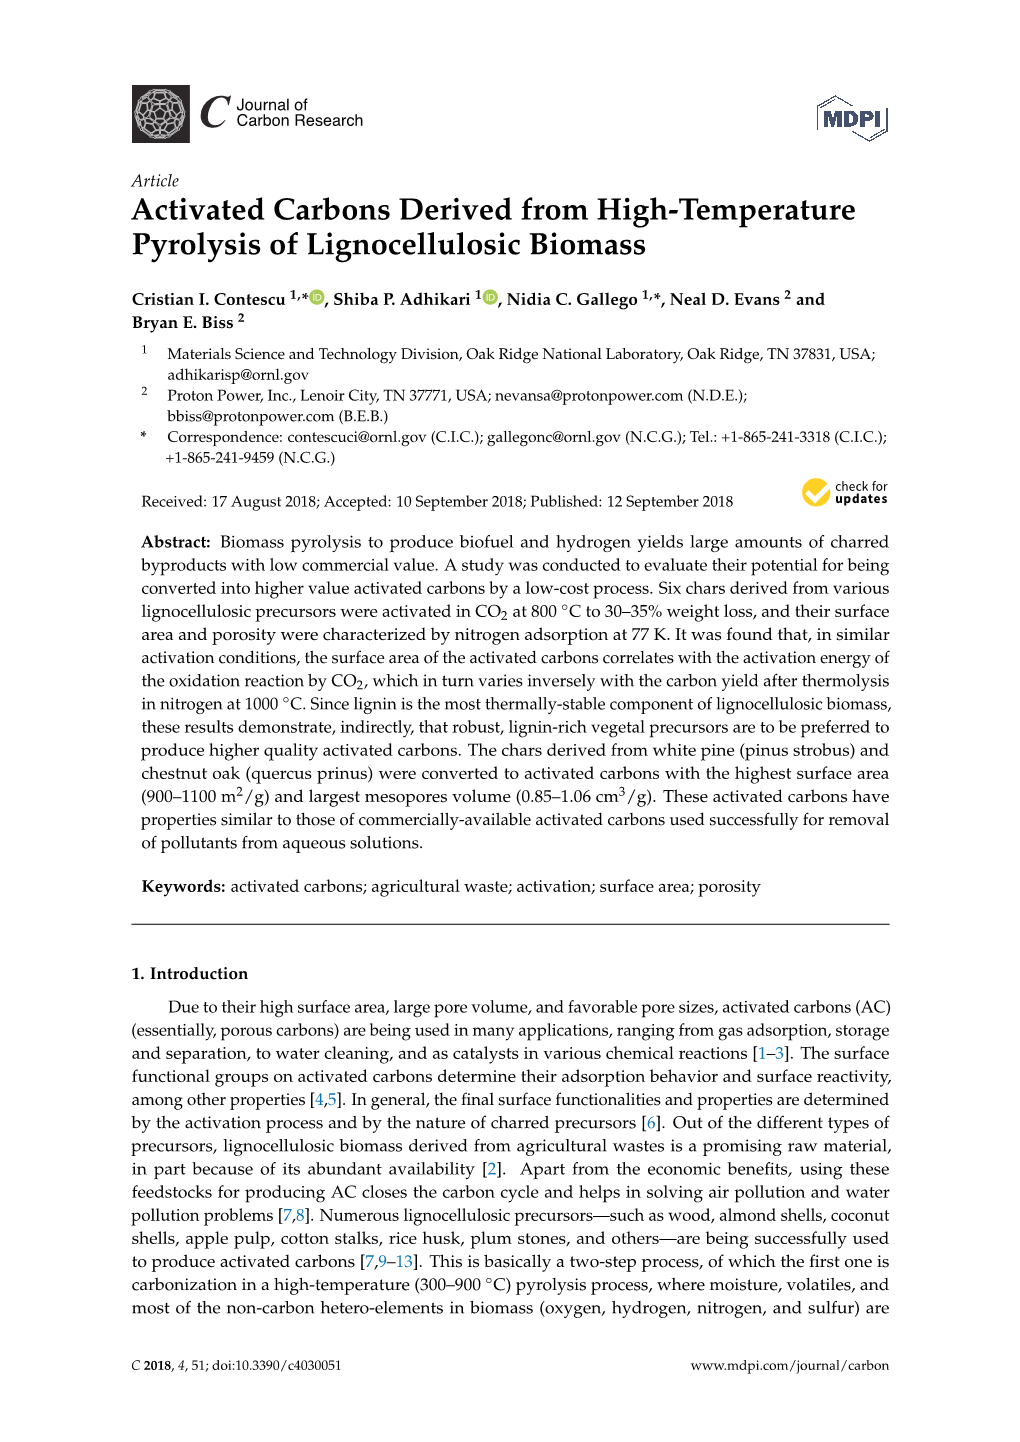 Activated Carbons Derived from High-Temperature Pyrolysis of Lignocellulosic Biomass